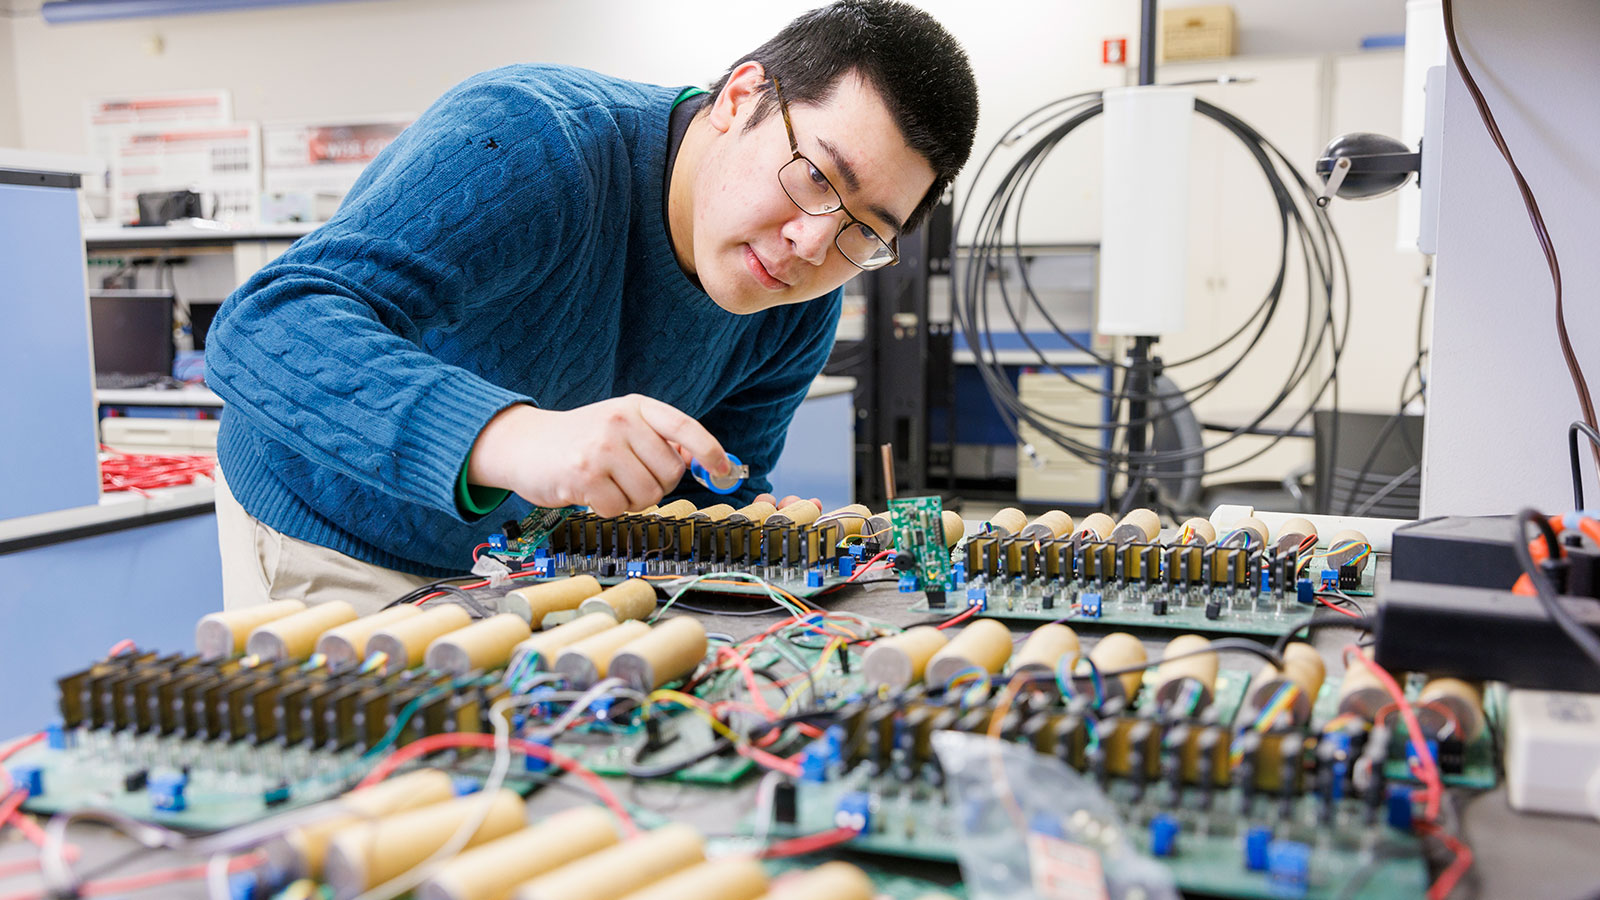 Man working with an electrical board.